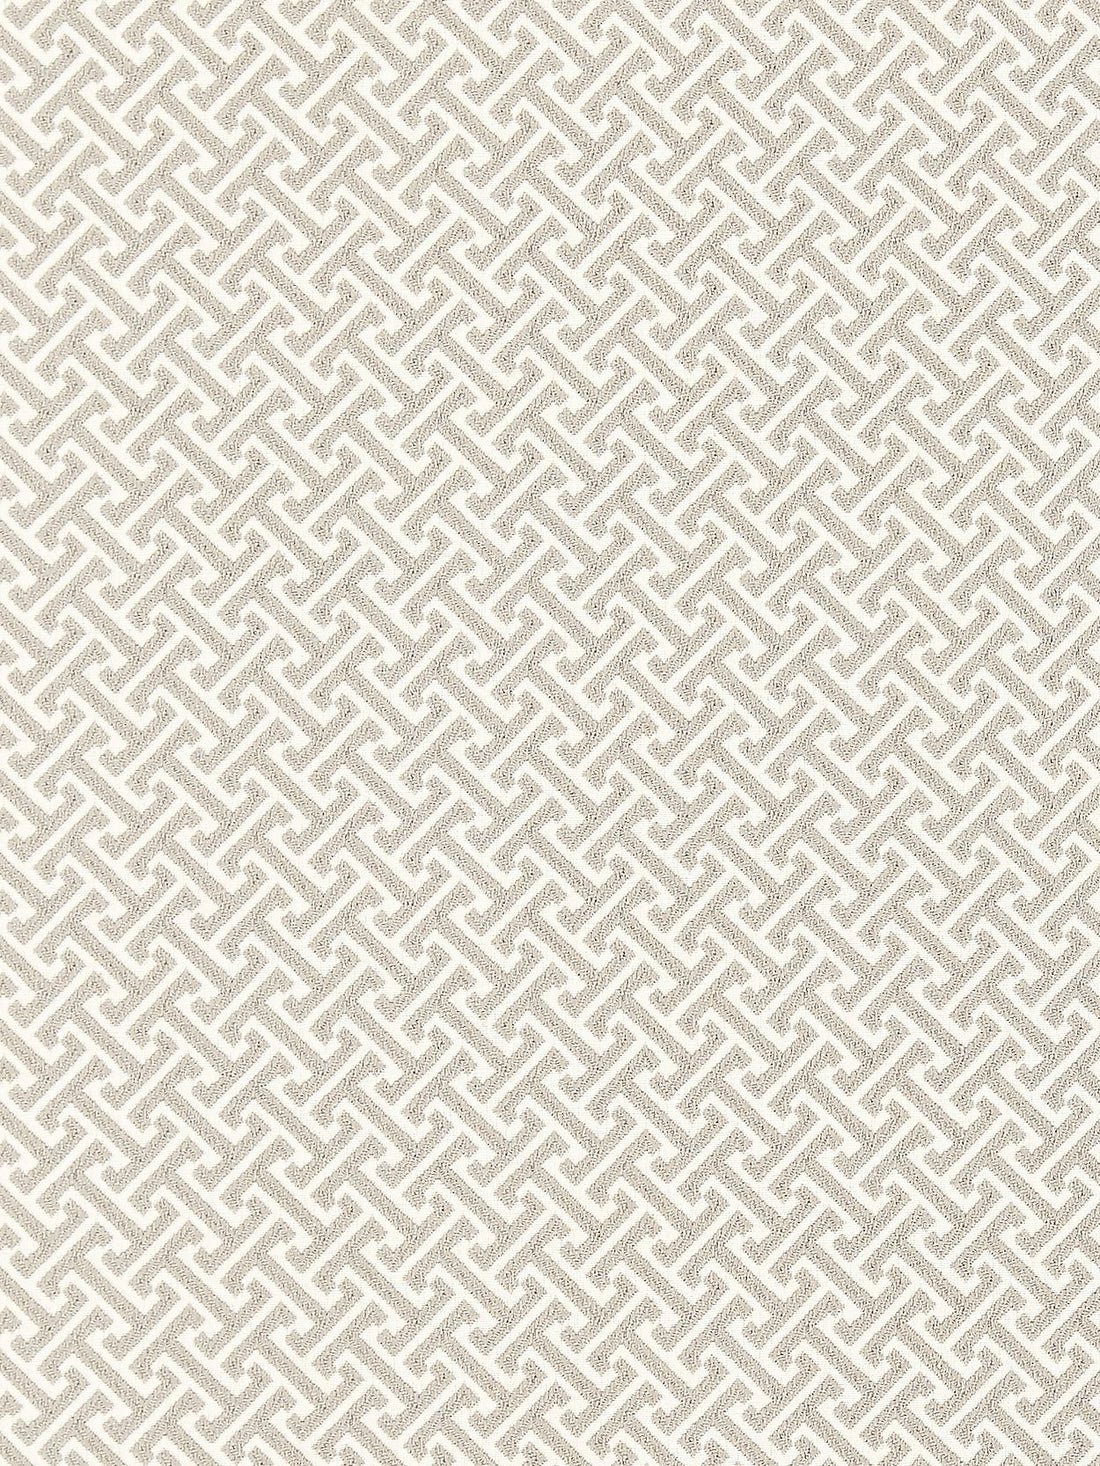 Mandarin Weave fabric in fog color - pattern number SC 000327102 - by Scalamandre in the Scalamandre Fabrics Book 1 collection